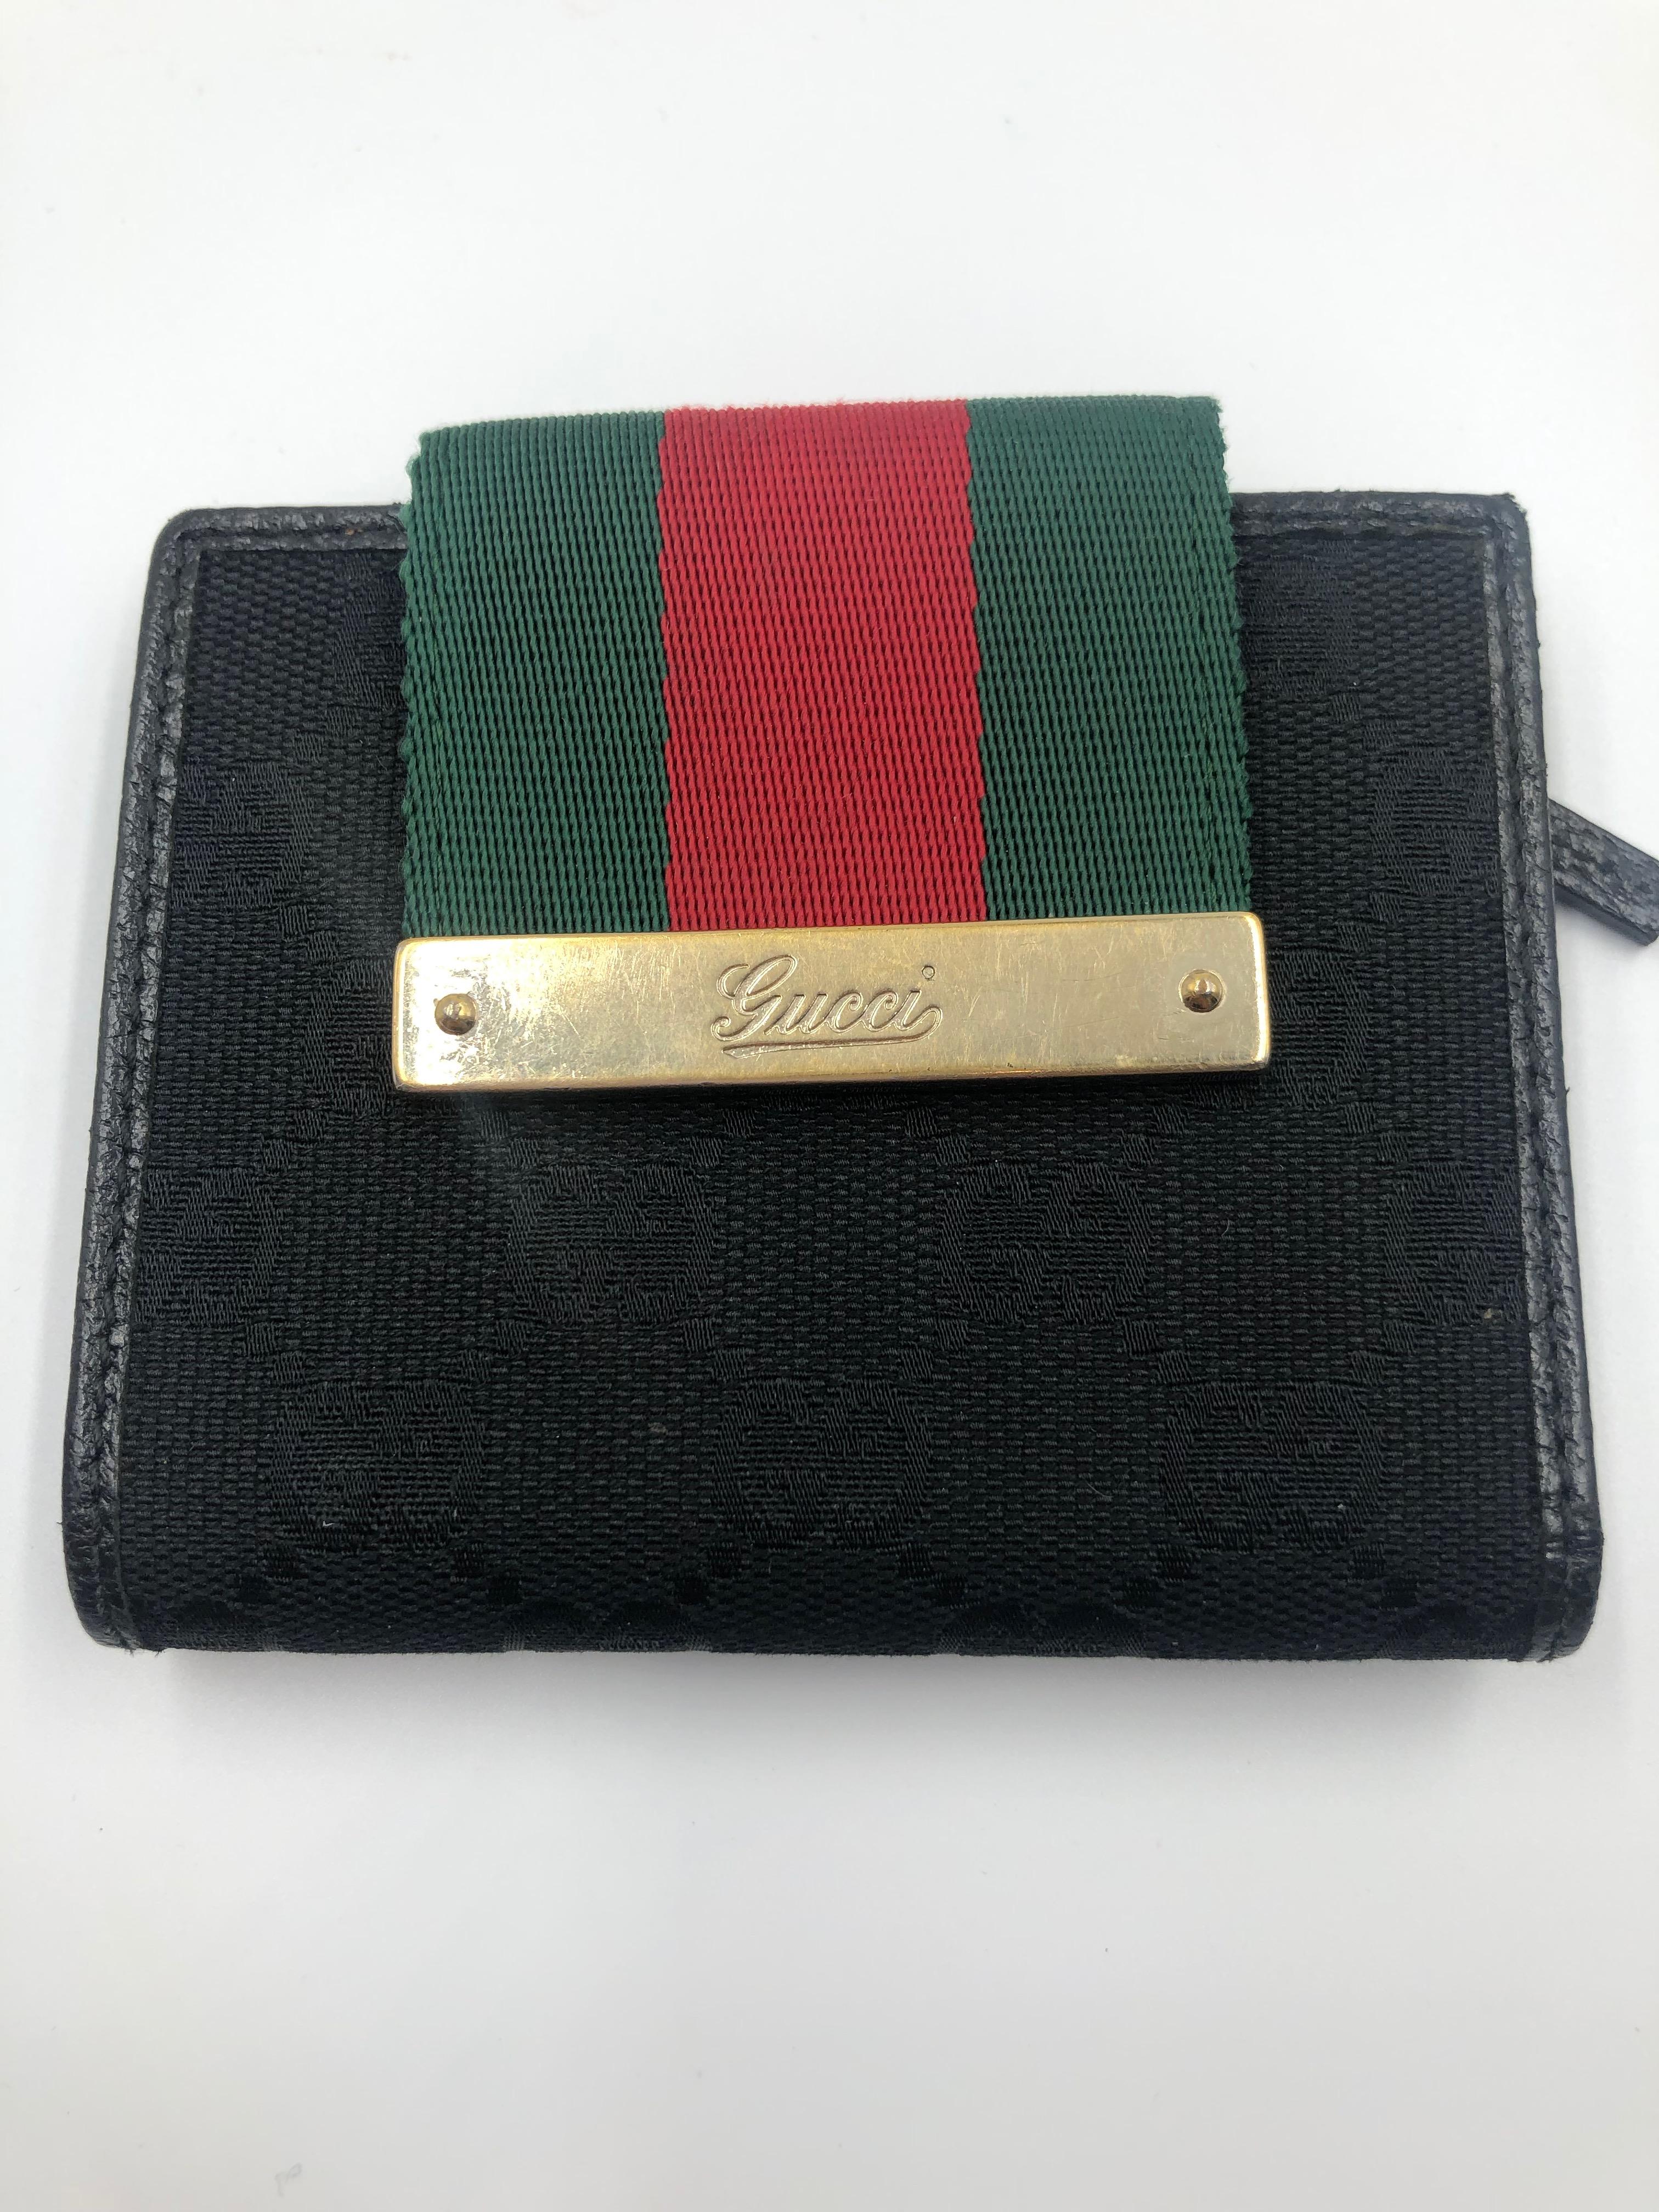 Women's or Men's Gucci Red & Green Stripe Small Wallet